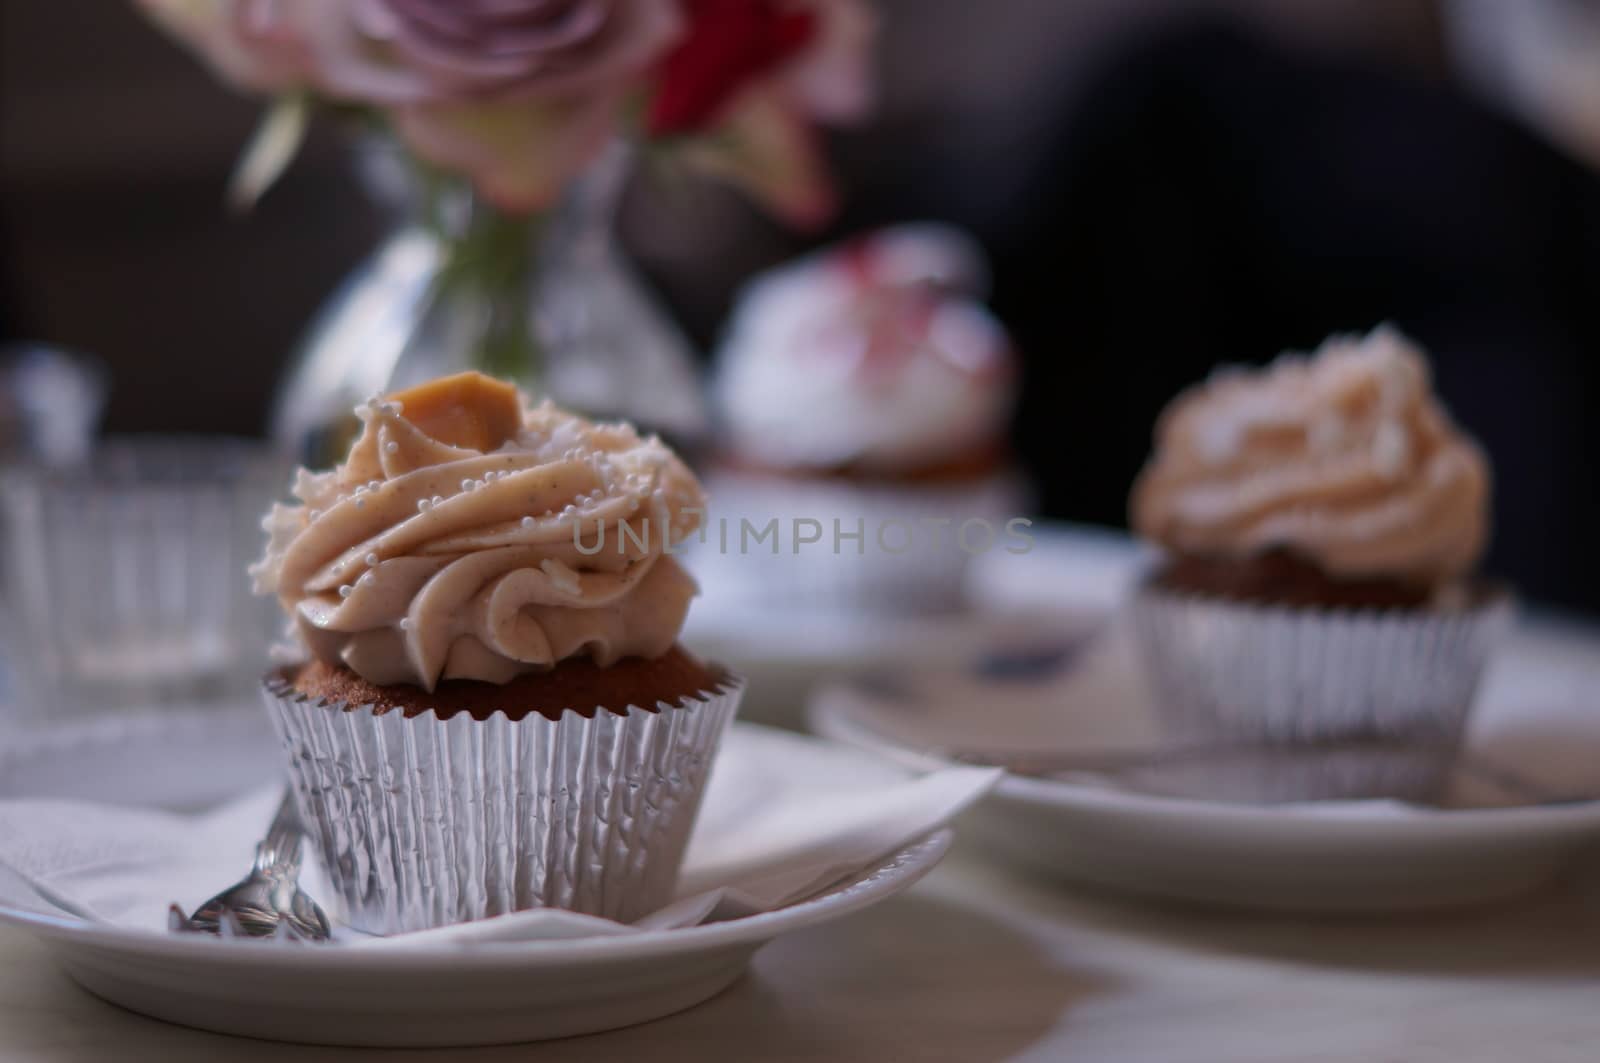 Cup cake with rose flowers by celaler